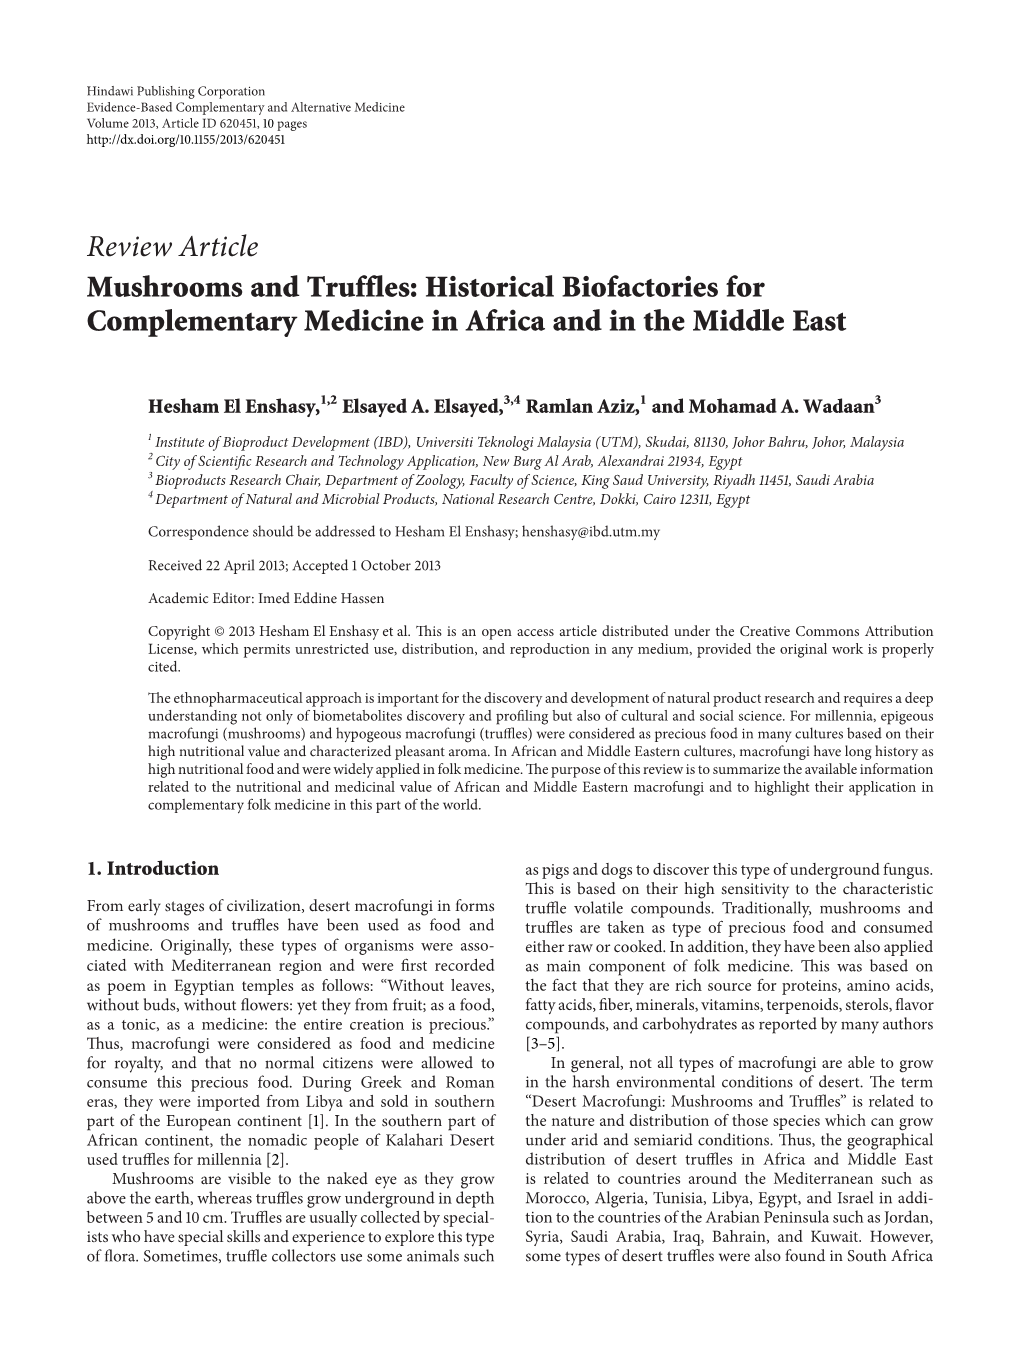 Mushrooms and Truffles: Historical Biofactories for Complementary Medicine in Africa and in the Middle East